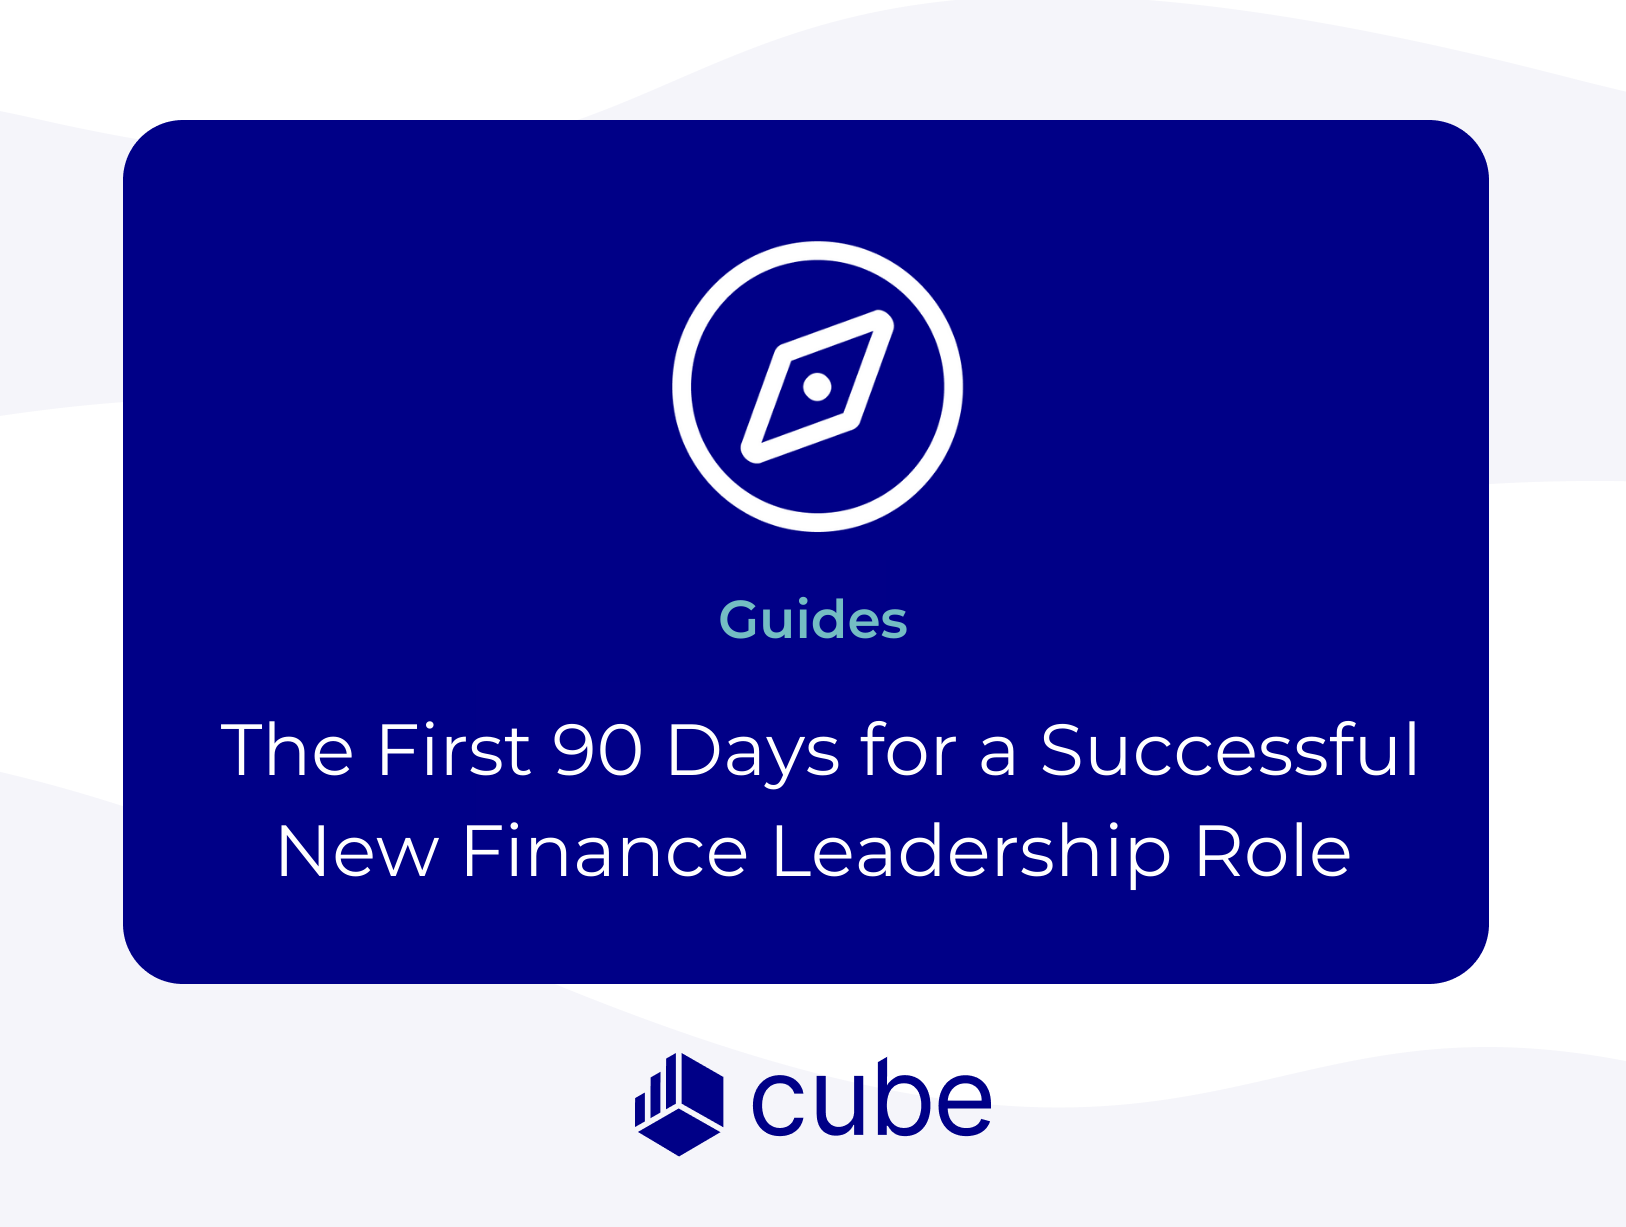 In a New Finance Leadership Role? Here’s a Guide for a Successful First 90 Days